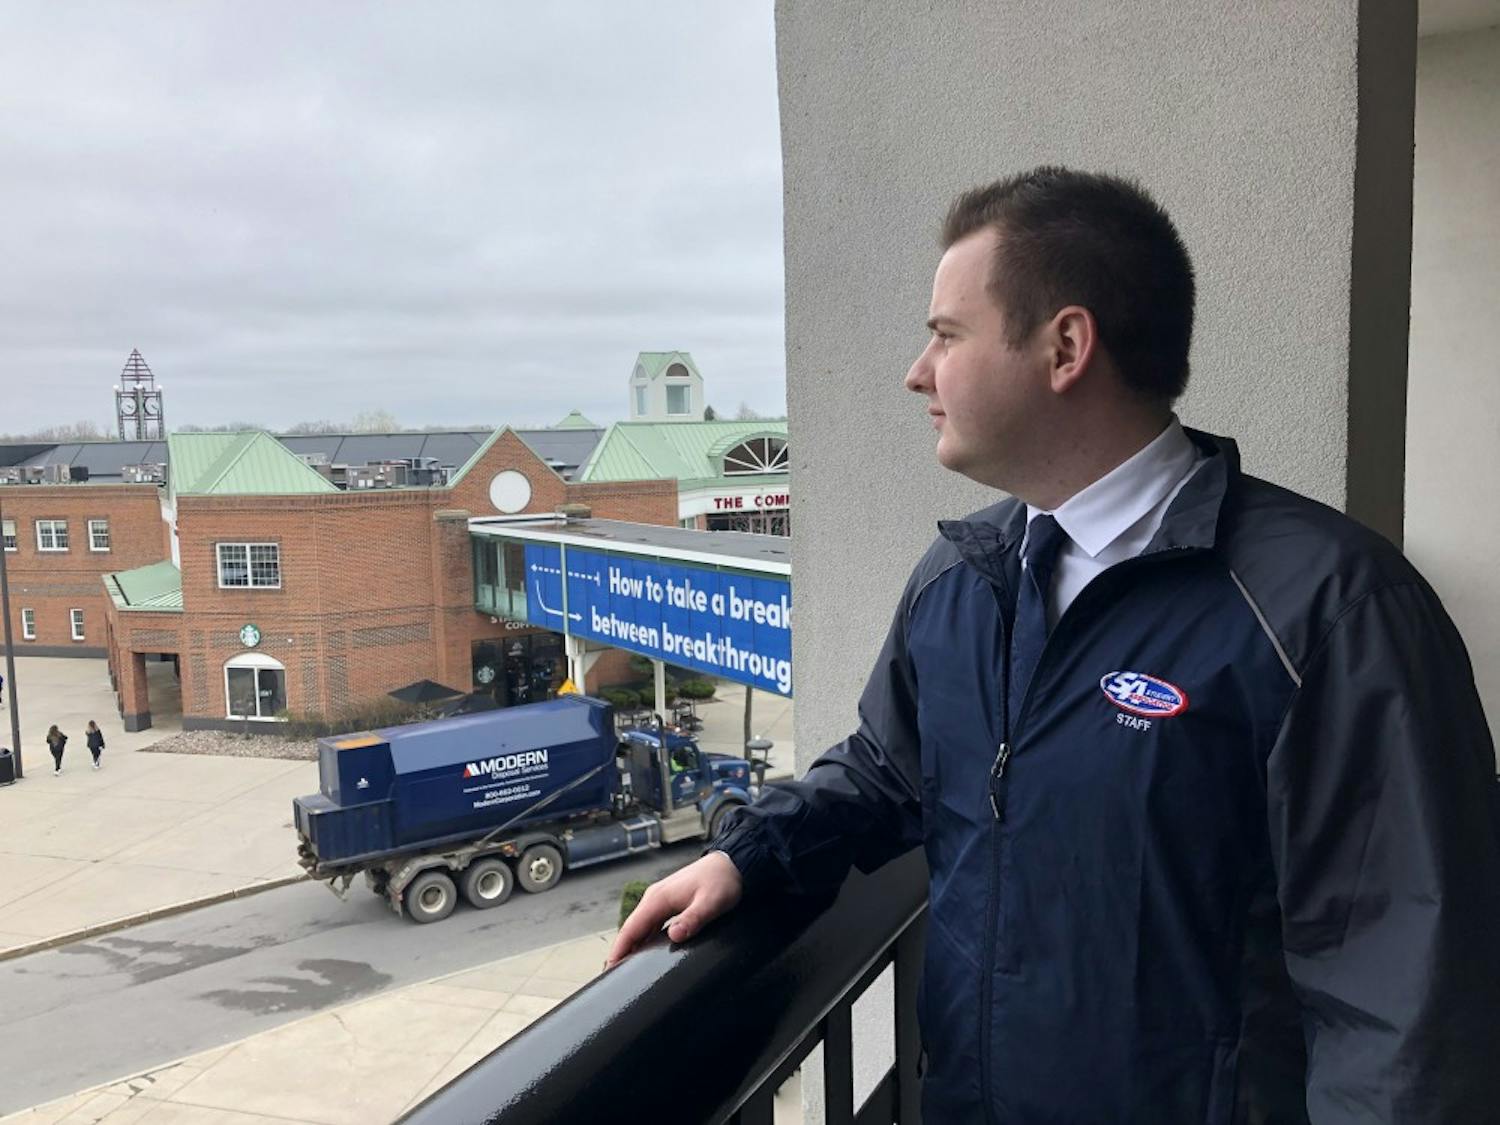 &nbsp;UB Student Association President Gunnar Haberl looks out at campus from the Student Union balcony. Haberl reflected on his year as SA president and discussed his plans for the future in an interview with The Spectrum. &nbsp;